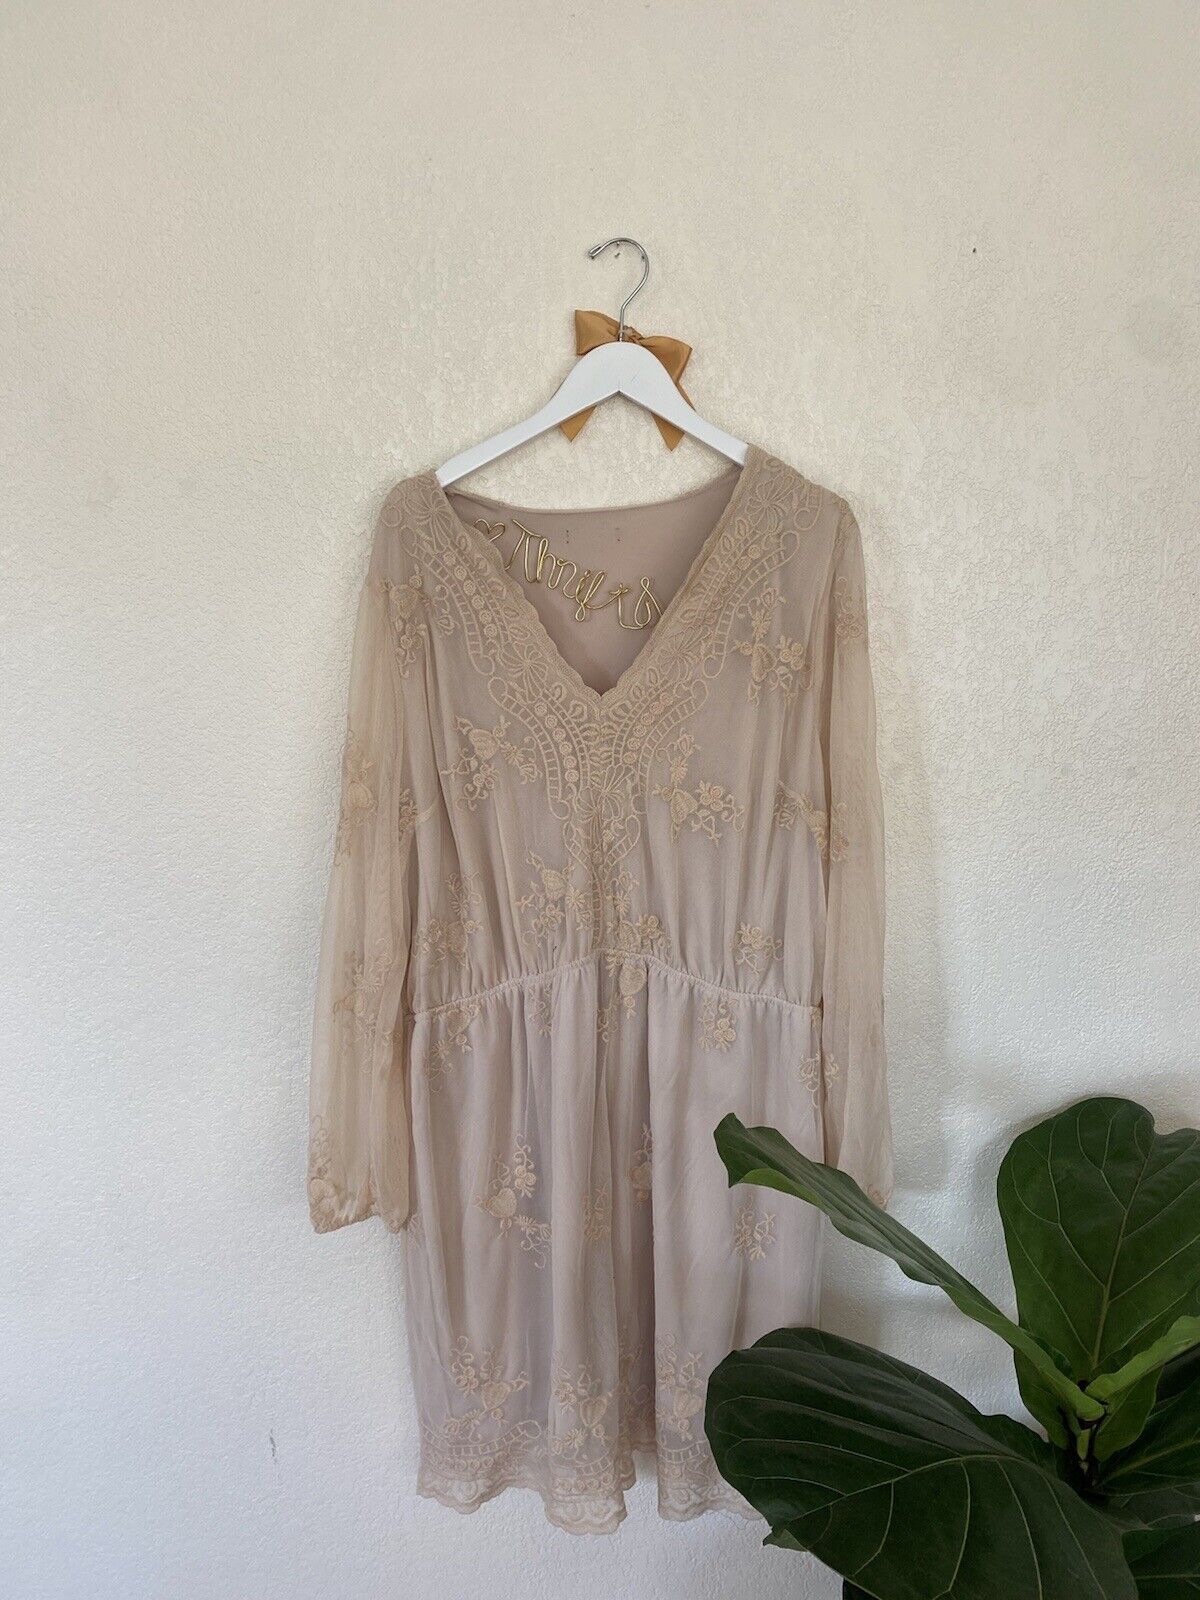 Off-White Lace Dress - Unbranded - Women's XXL